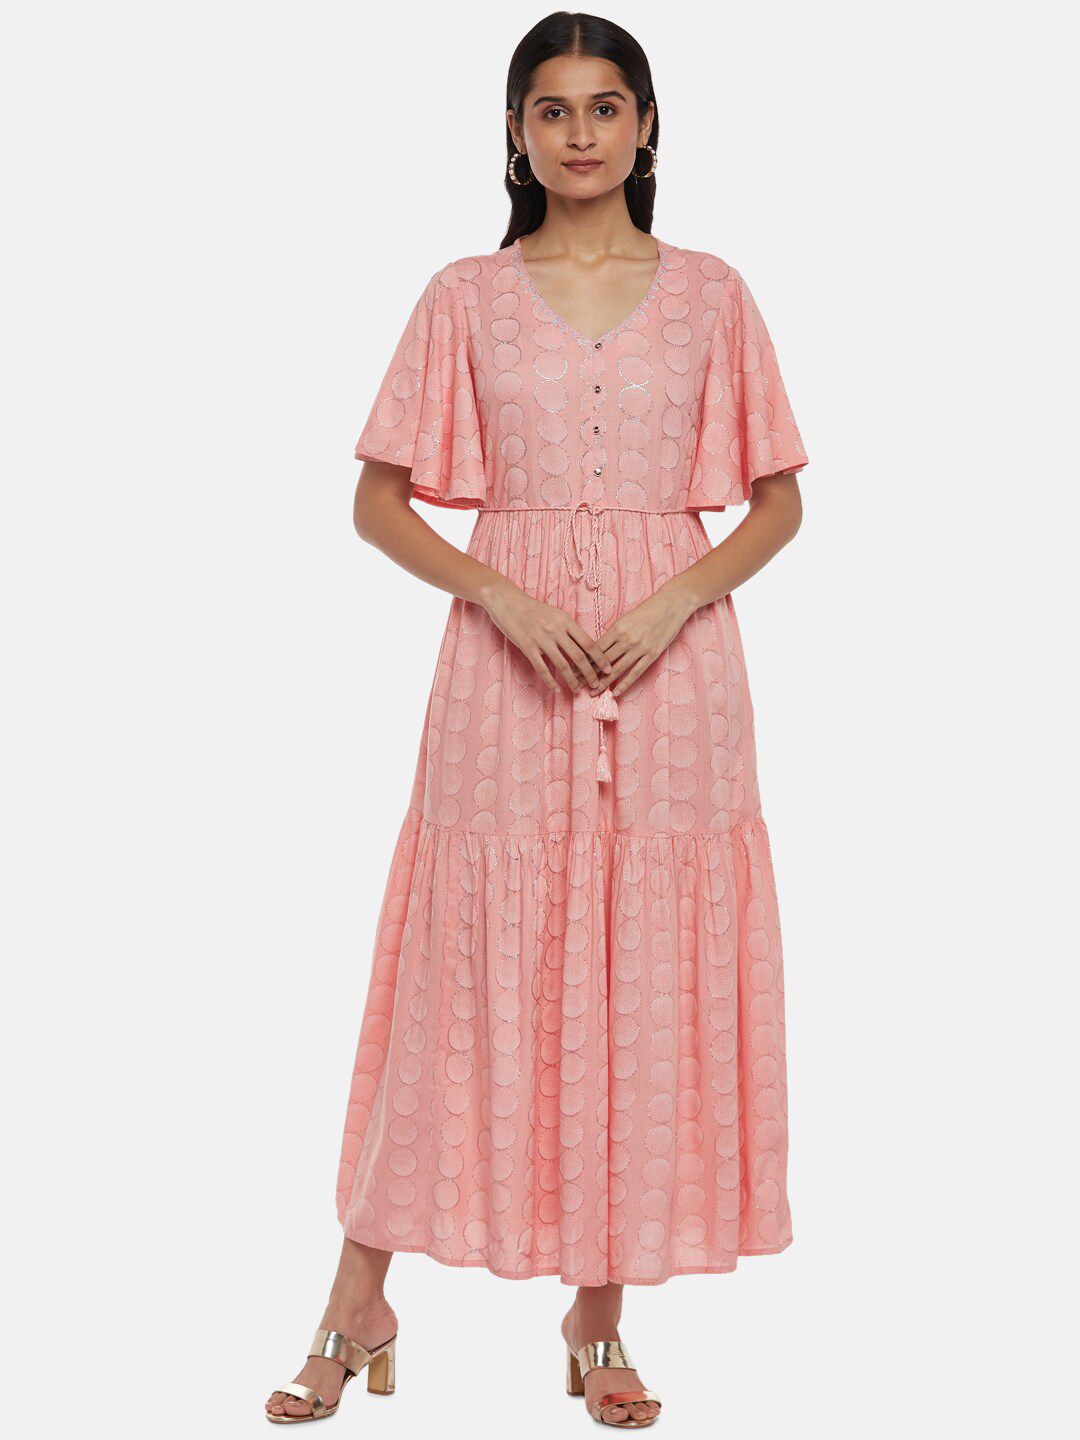 AKKRITI BY PANTALOONS Peach-Coloured & mellow rose Checked Ethnic Maxi Dress Price in India